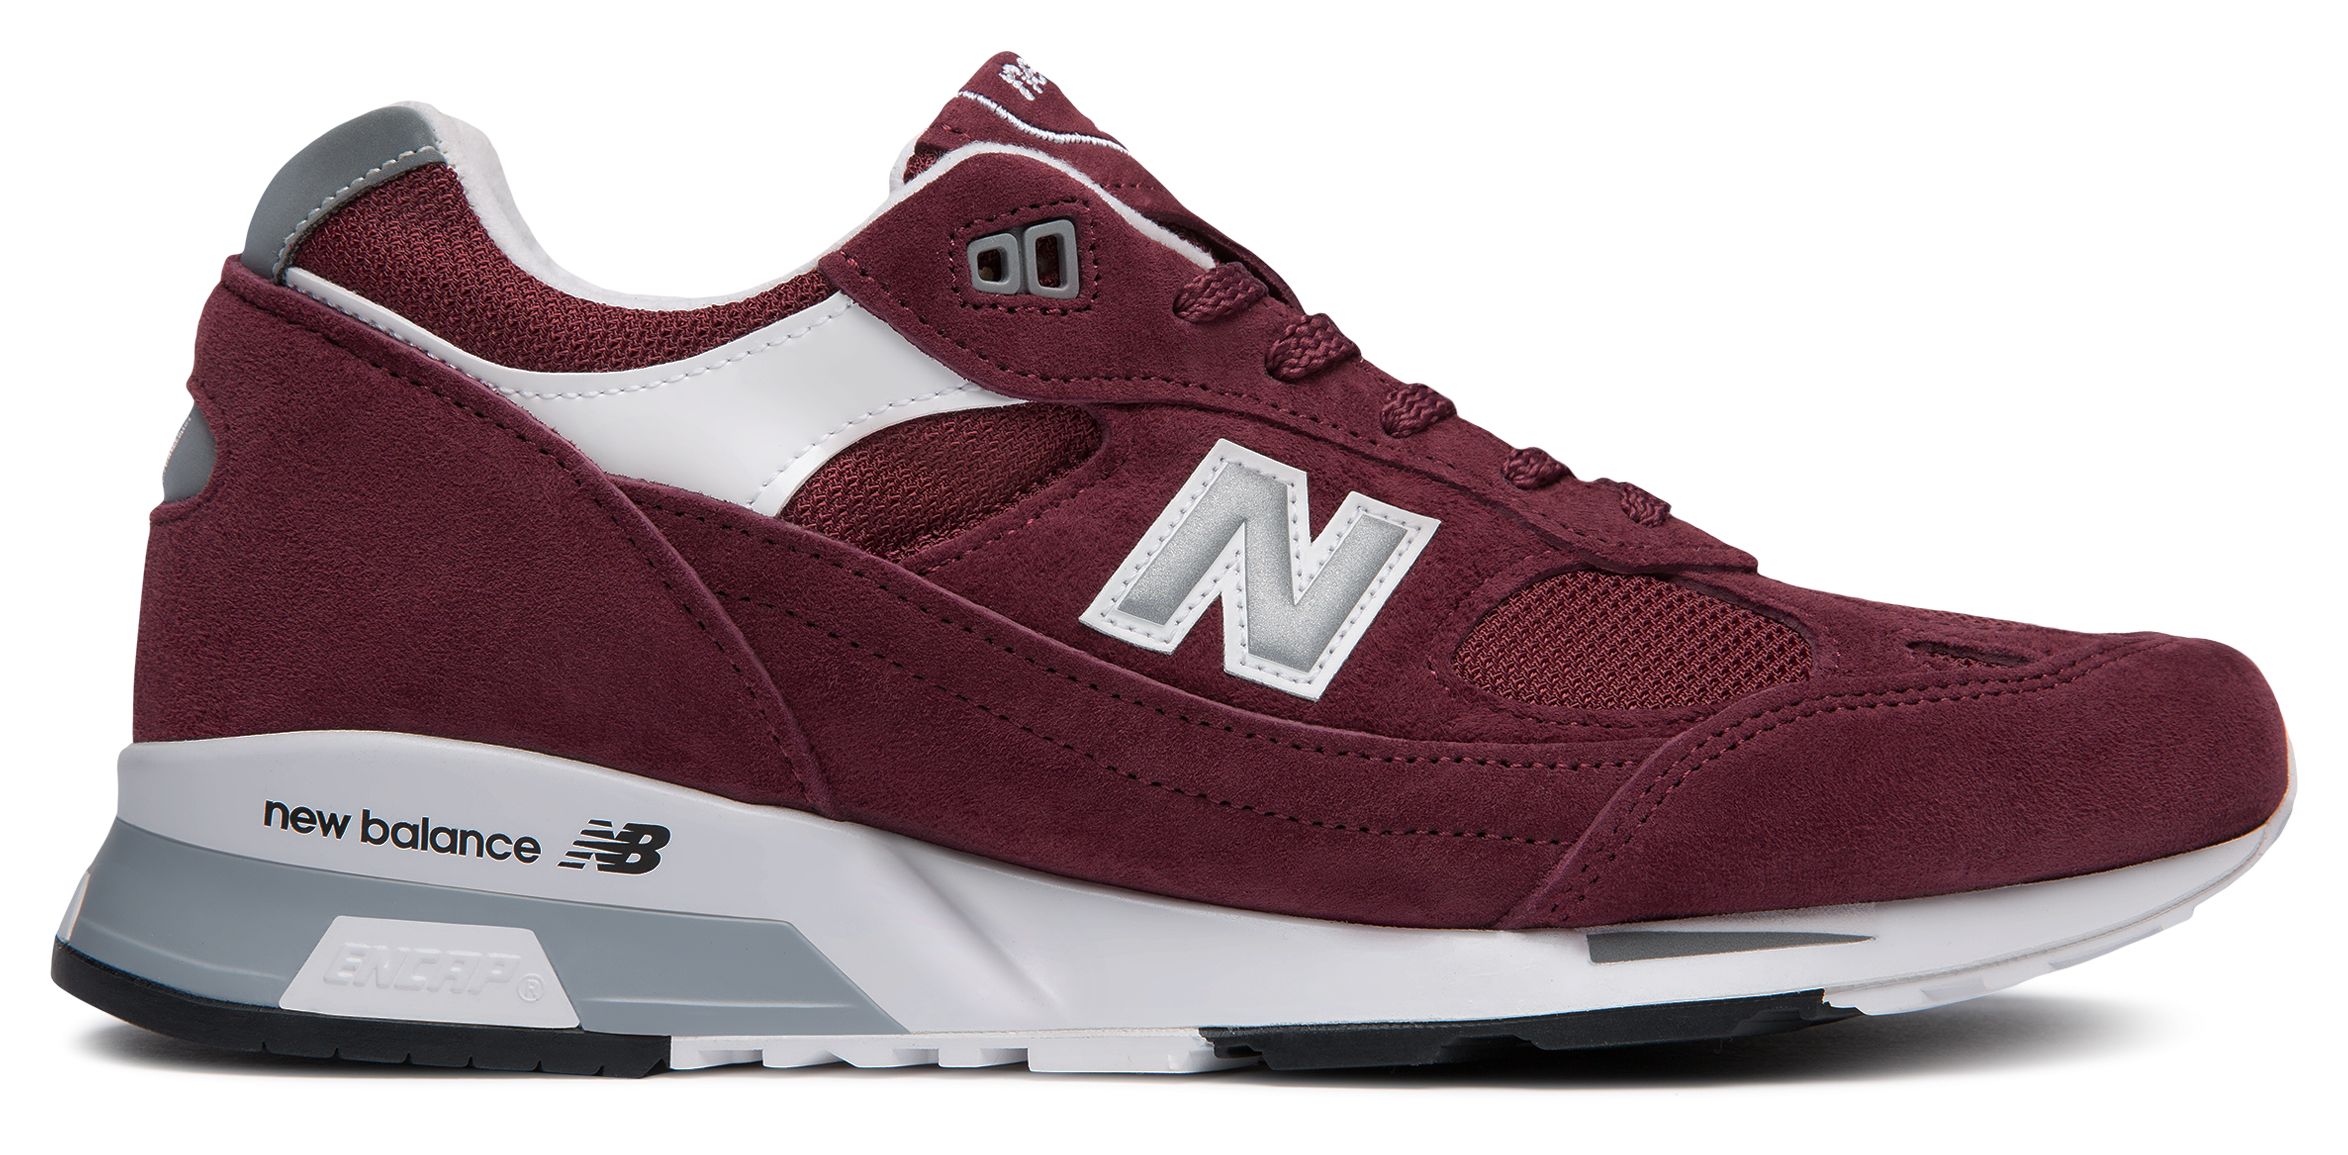 Men's 991.5 Made in UK Lifestyle Shoes M9915-PM - New Balance